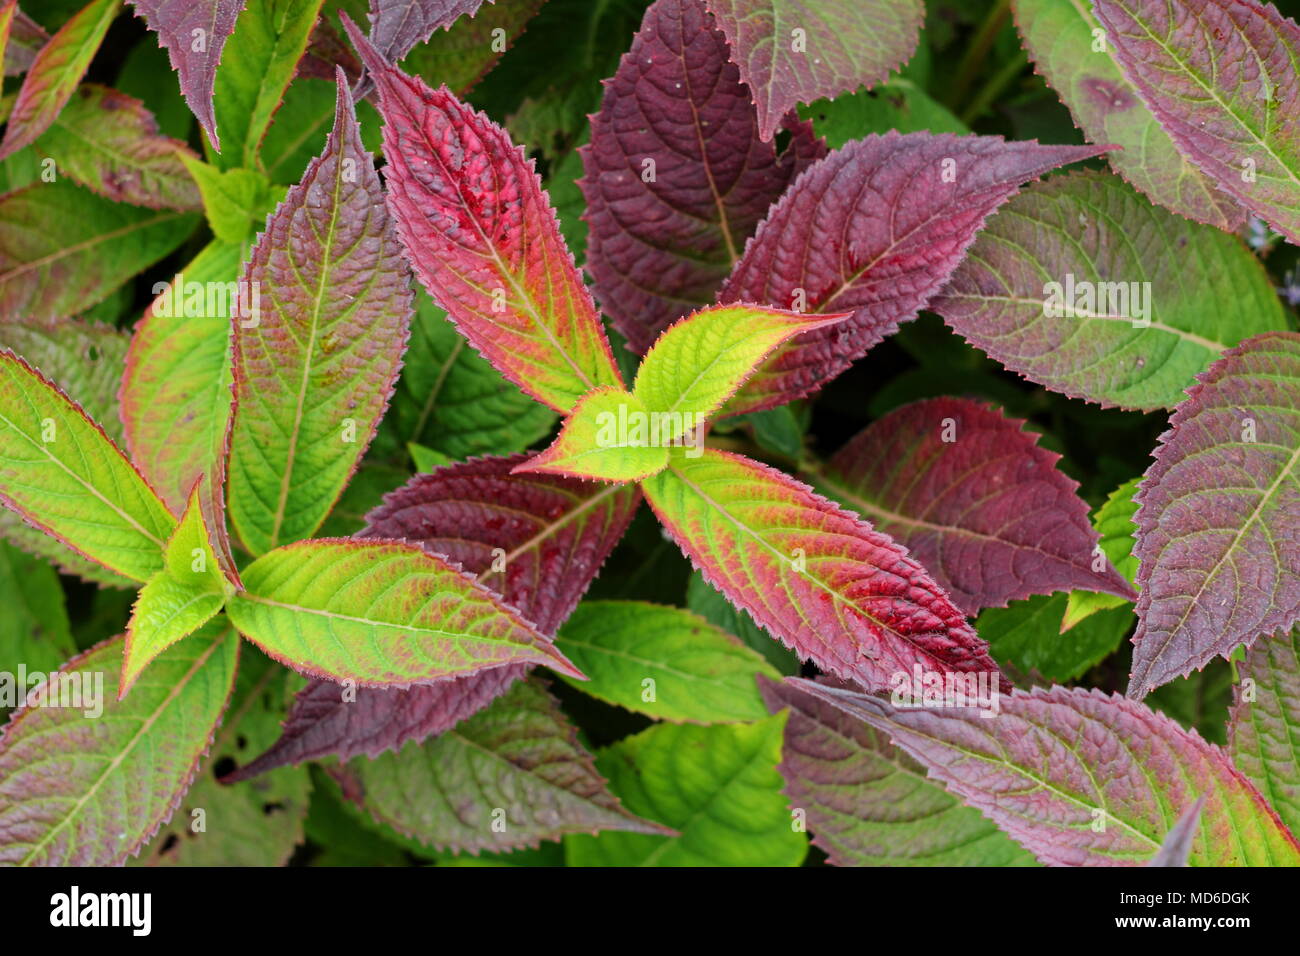 Hydrangea serrata Mount Aso, also called Mont Aso leaves showing autumn foliage in an English garden in late summer, UK Stock Photo